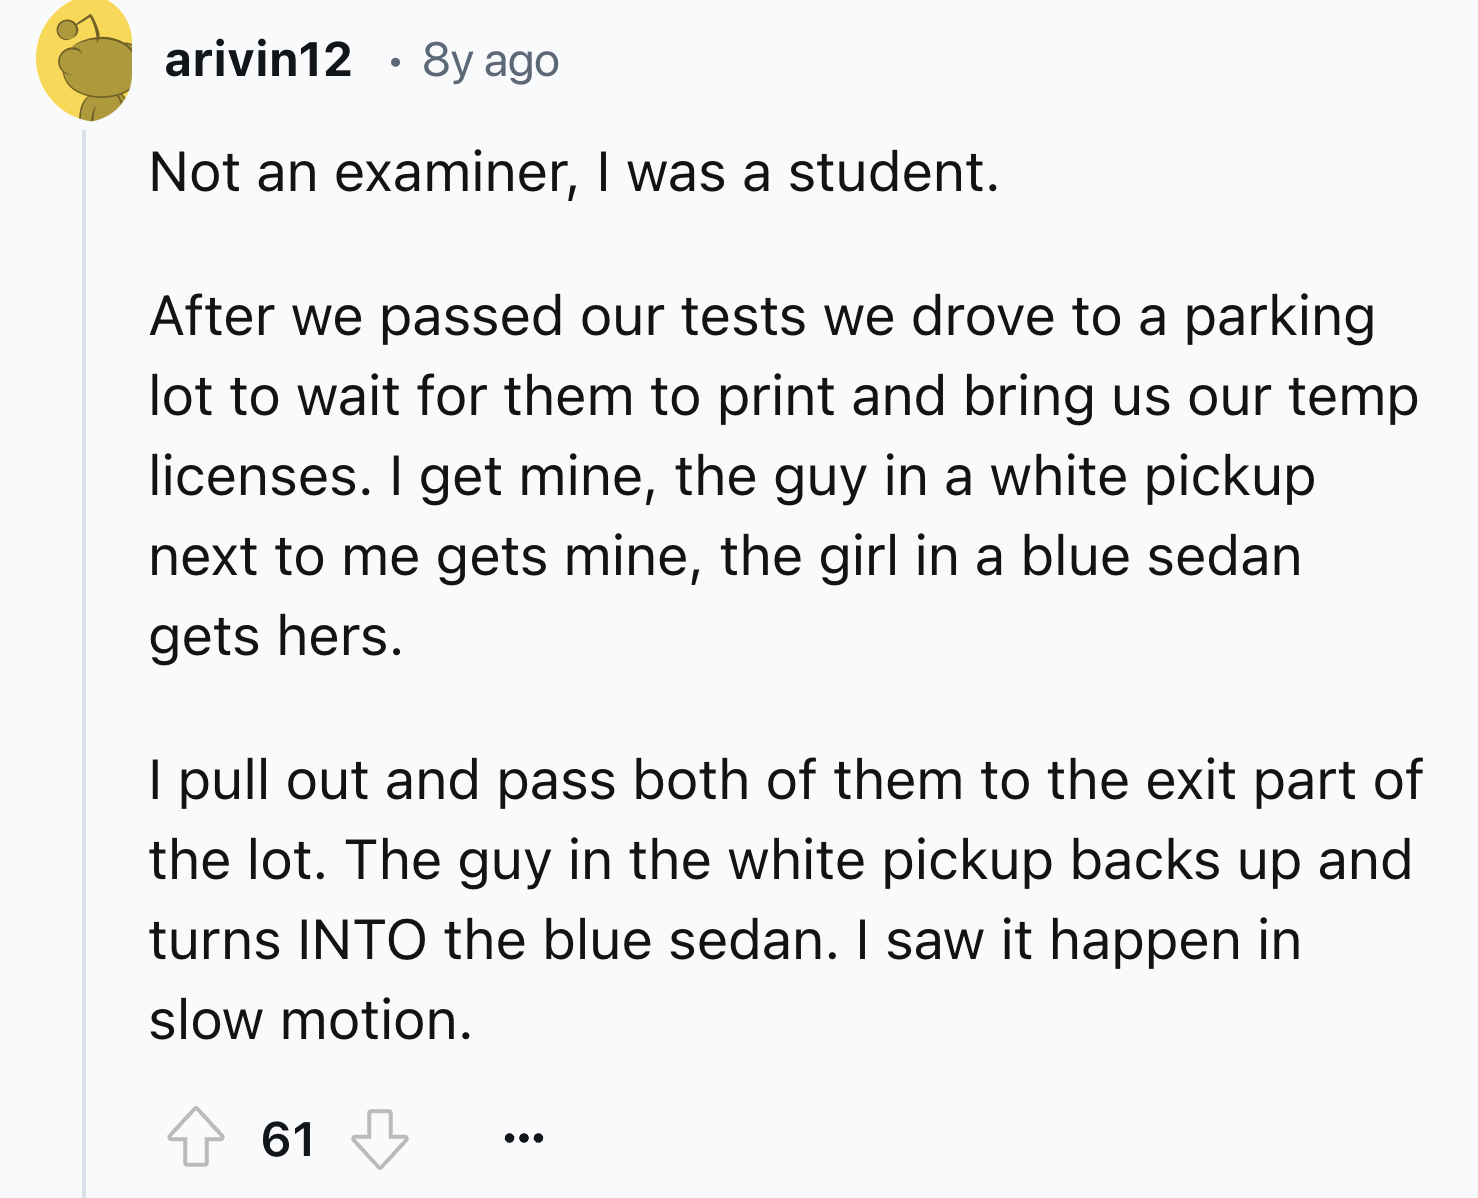 screenshot - arivin12 8y ago Not an examiner, I was a student. After we passed our tests we drove to a parking lot to wait for them to print and bring us our temp licenses. I get mine, the guy in a white pickup next to me gets mine, the girl in a blue sed